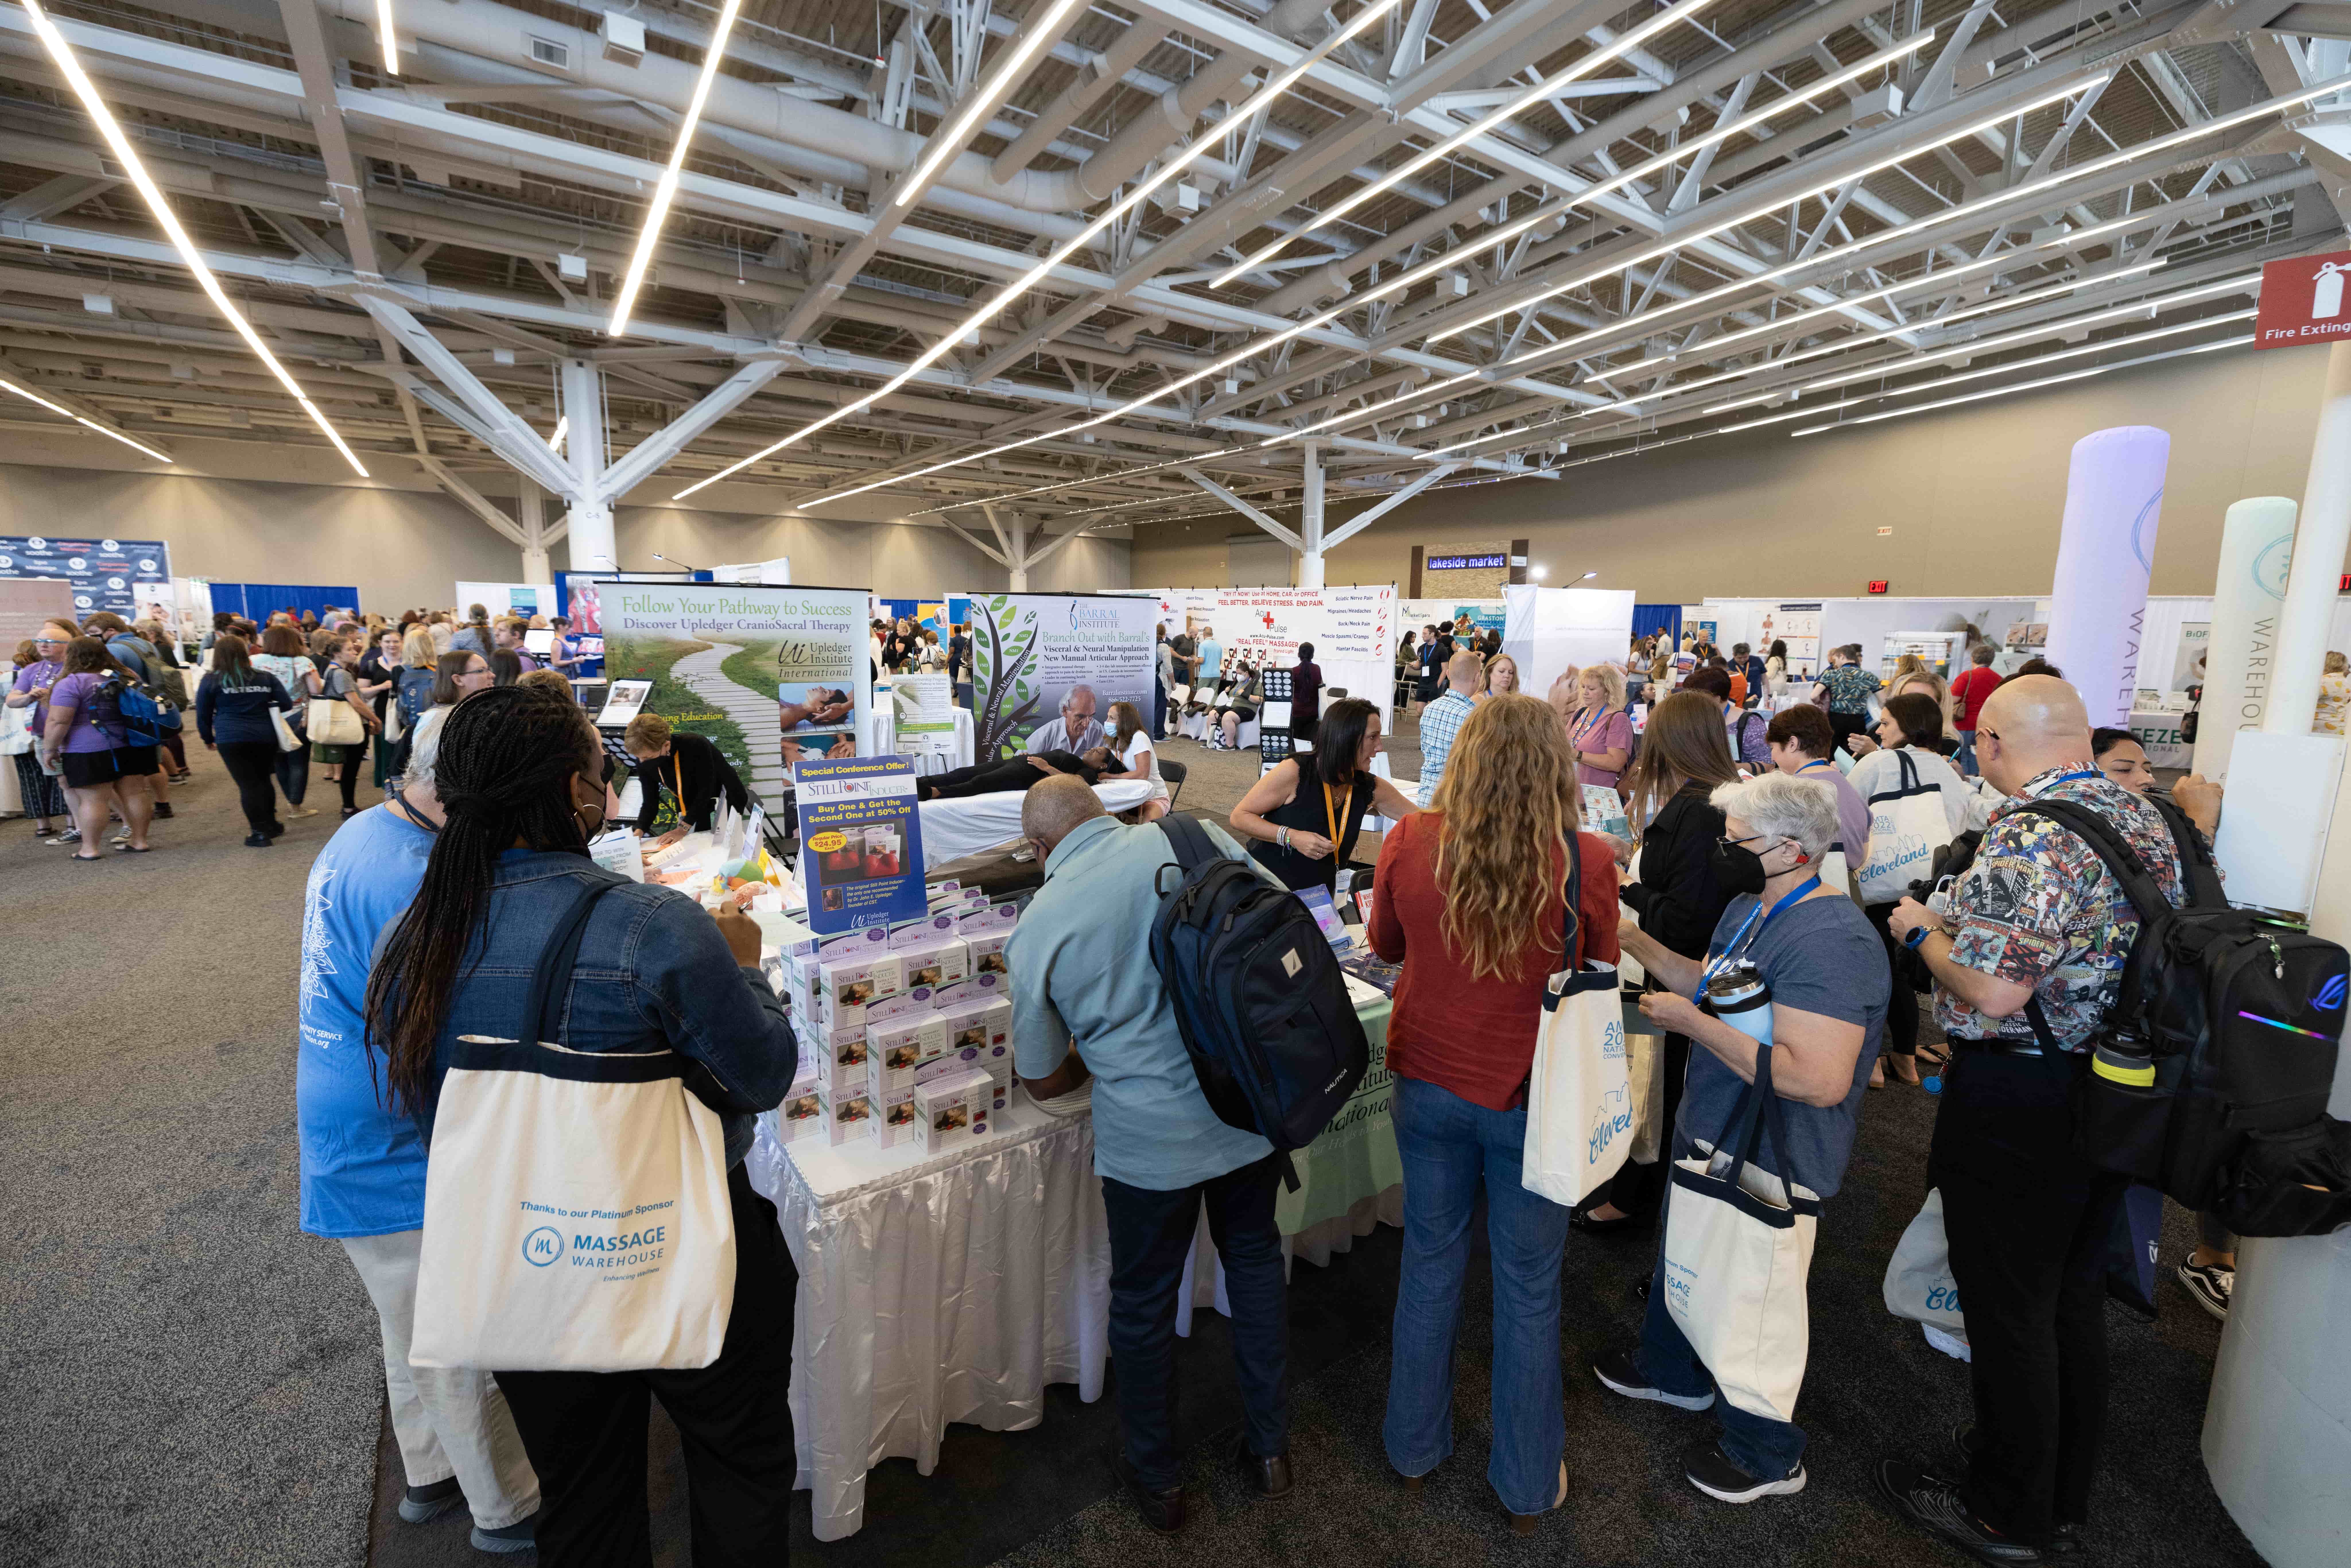 The exhibit hall opened on Thursday afternoon to great enthusiasm and excitement from all who participated.